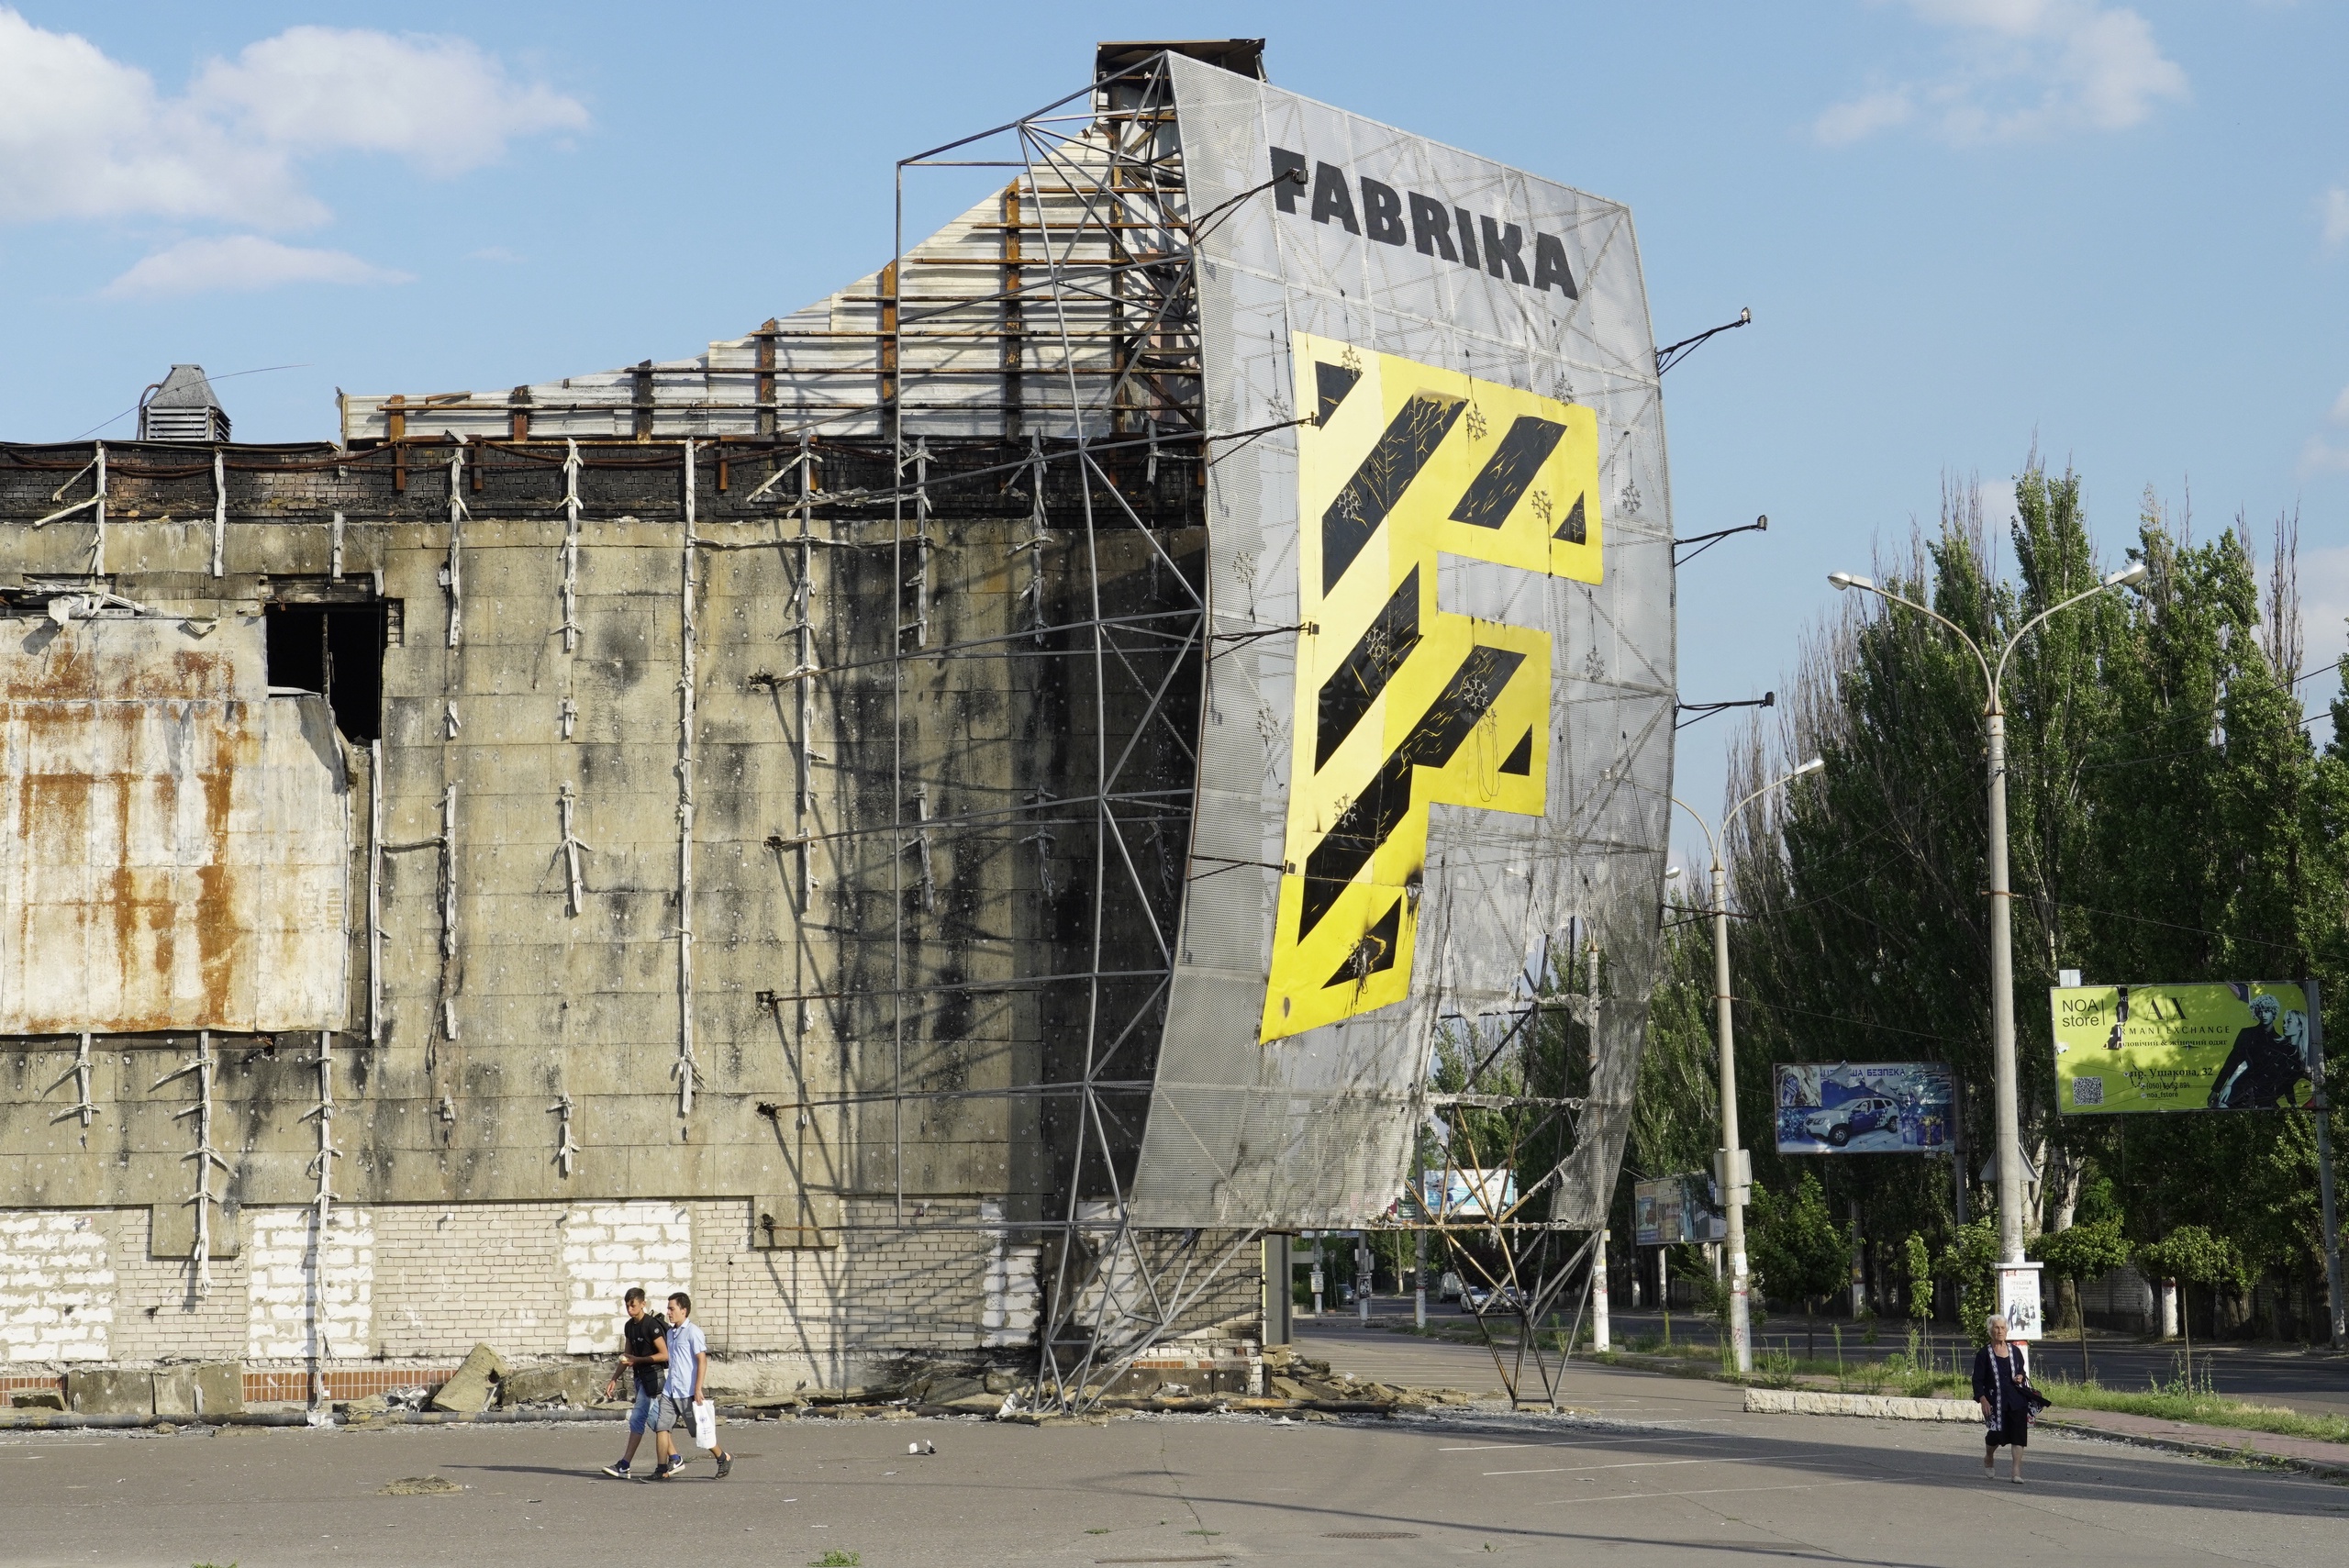 A view of the destroyed Fabrika shopping mall in the city of Kherson on July 20, 2022, amid the ongoing Russian military action in Ukraine.